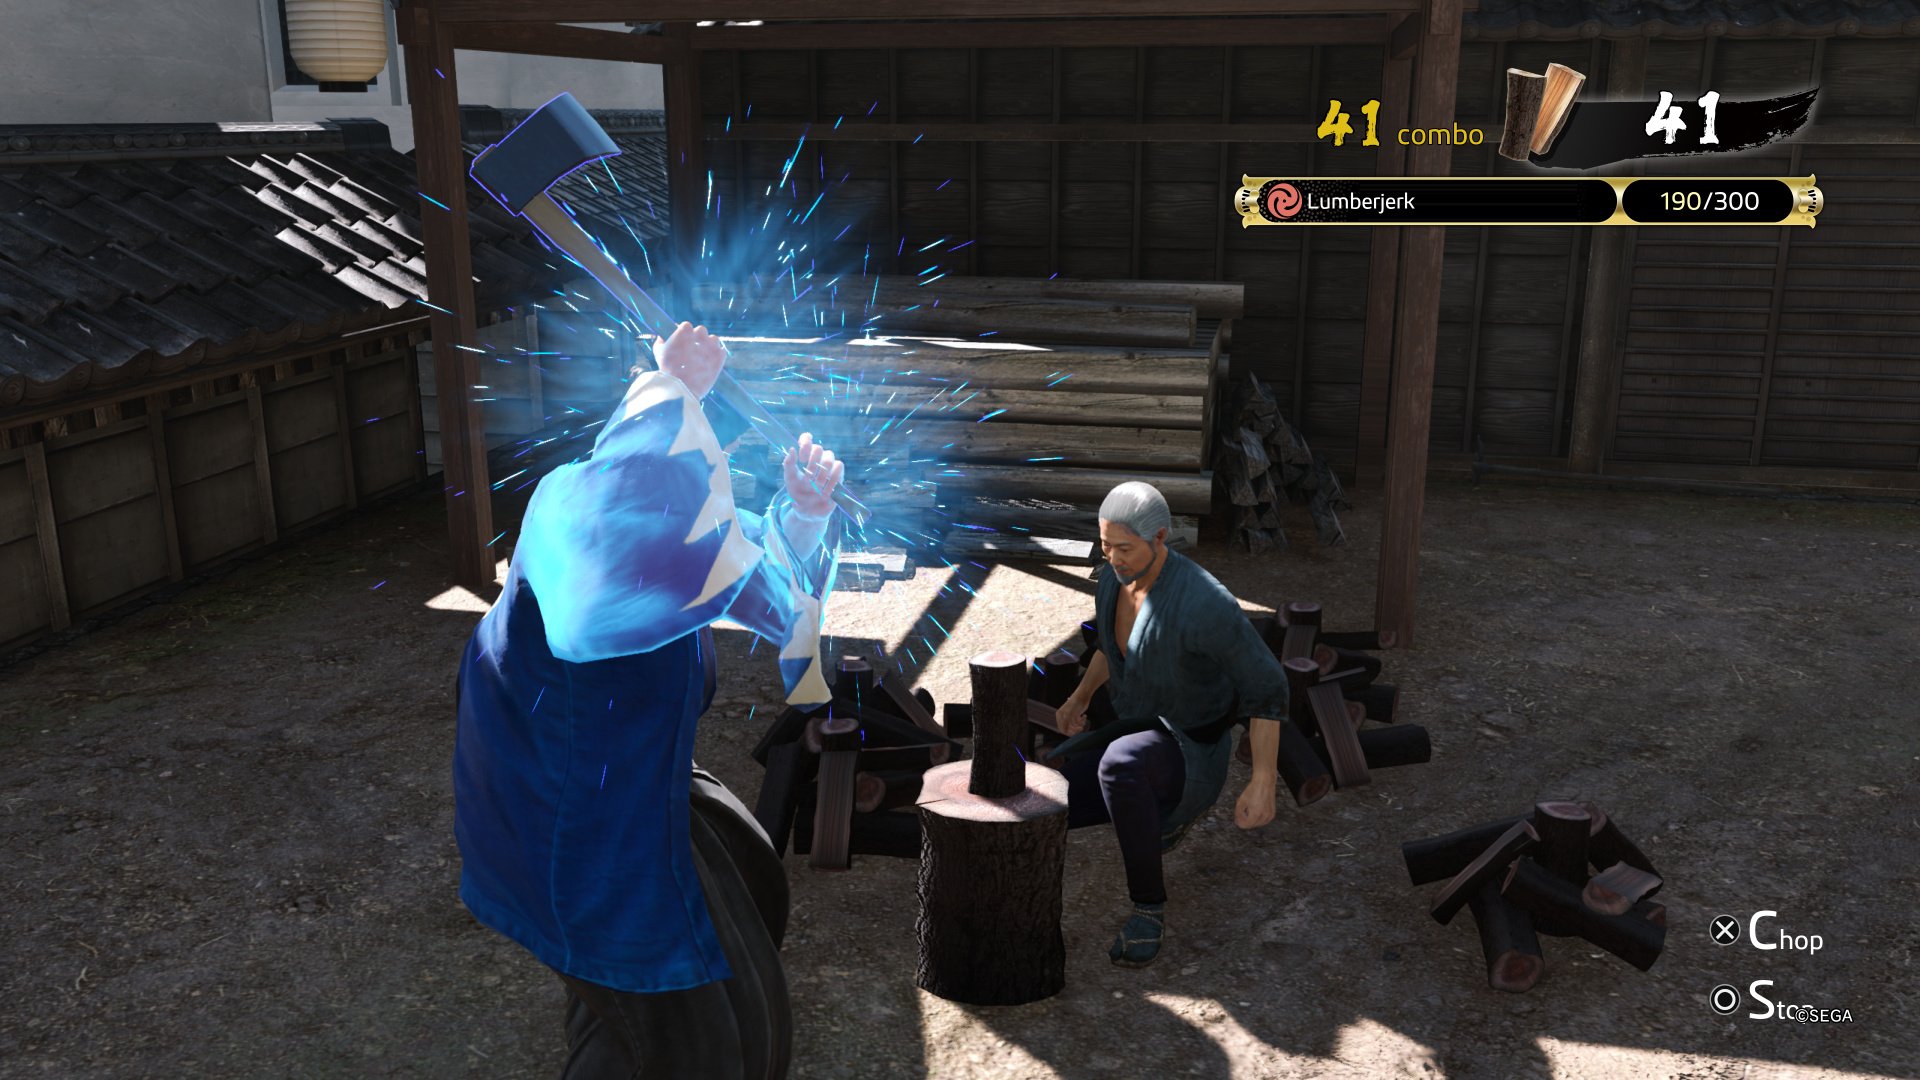 This mod brings the cast of the Devil May Cry series to Yakuza